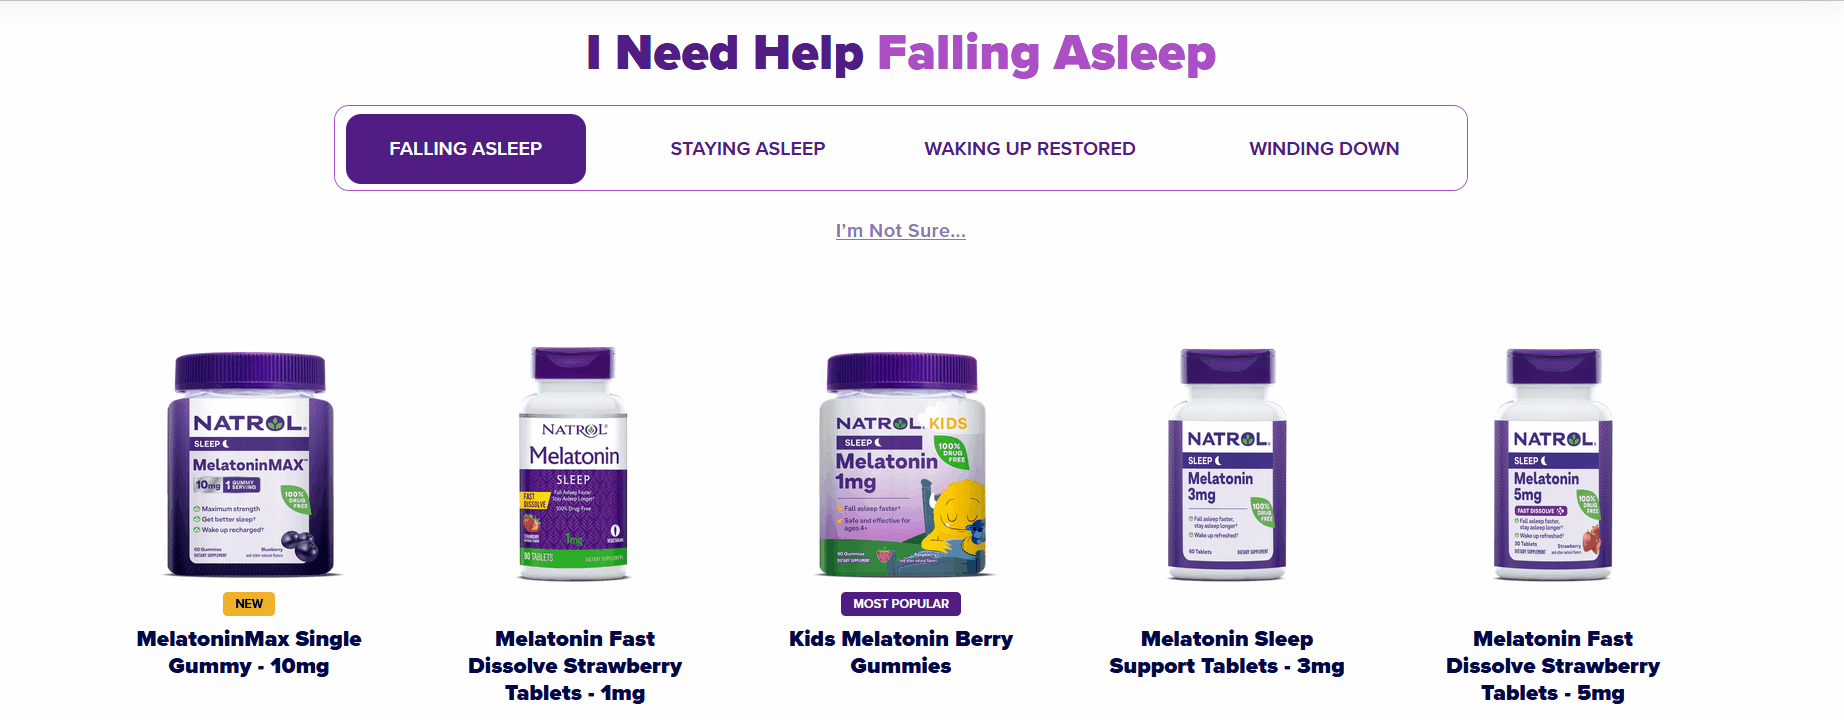 Natrol website with quiz and product options.